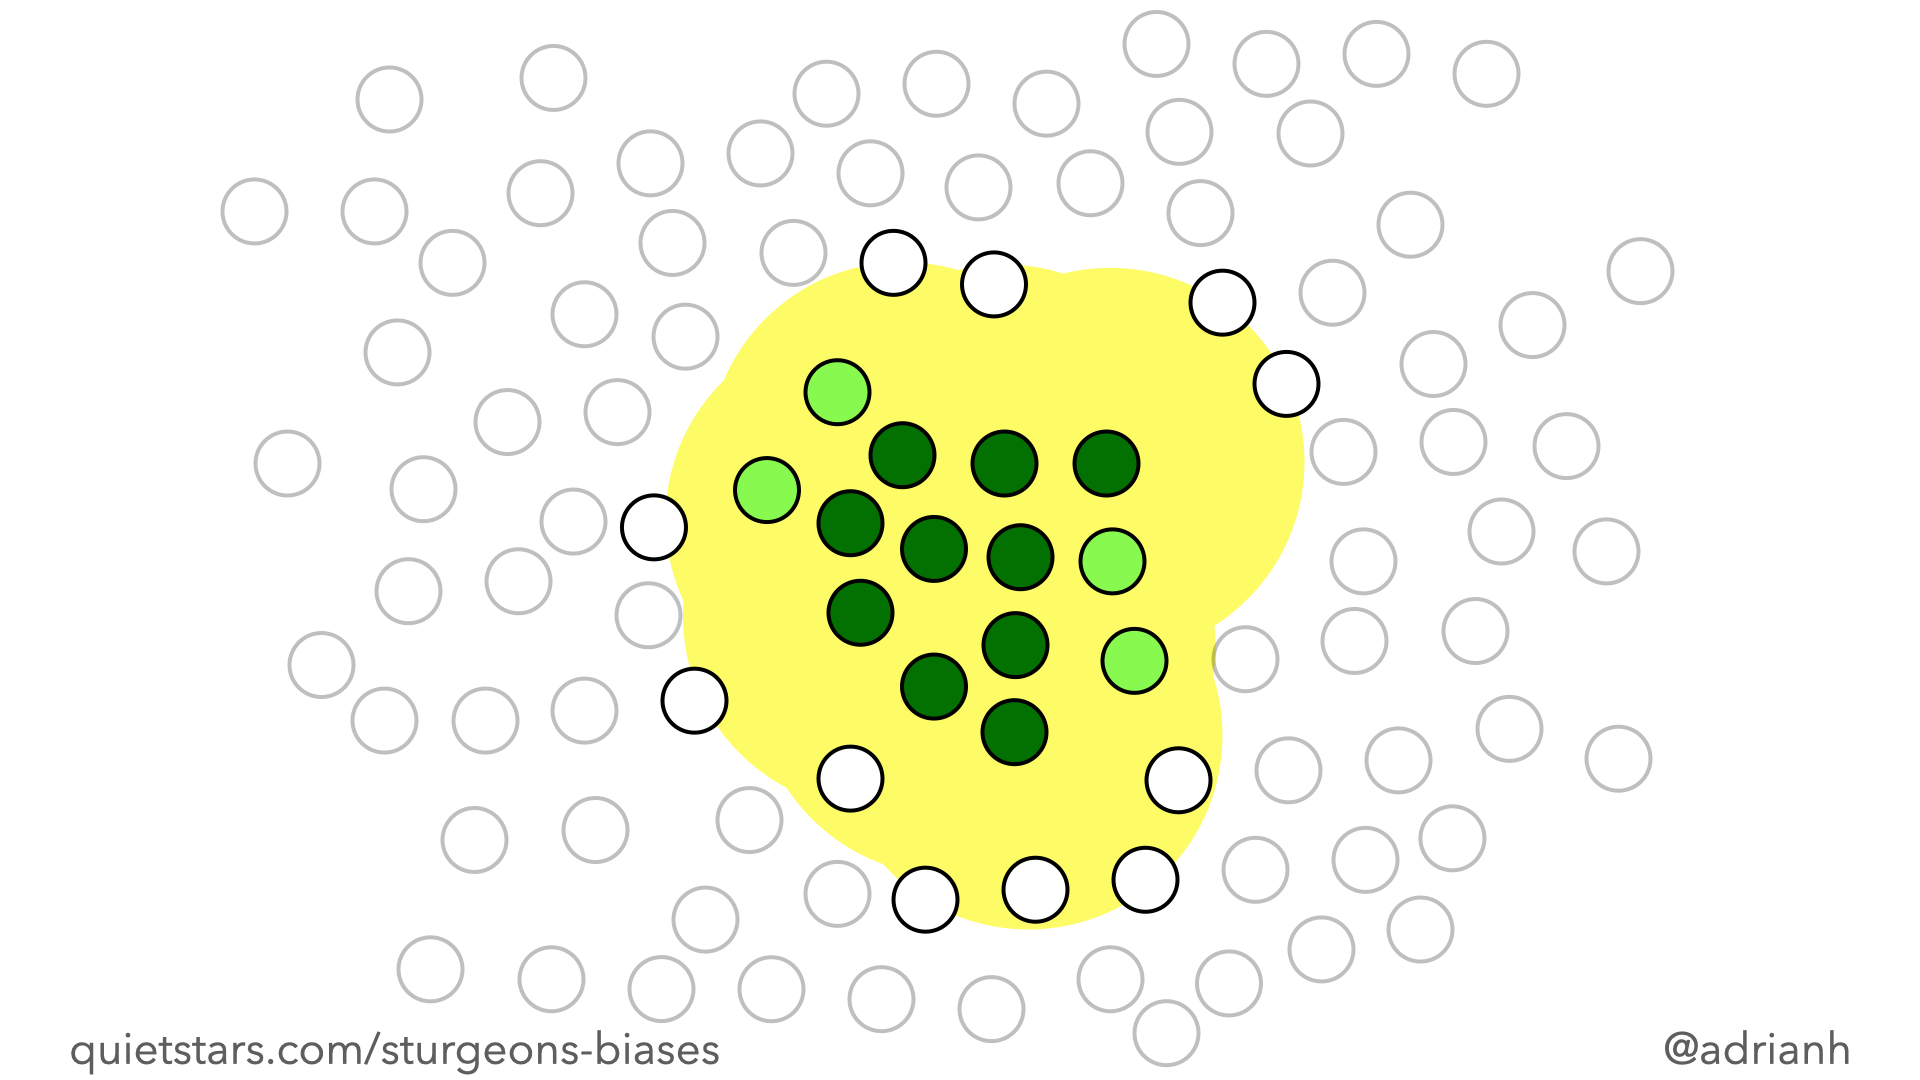 Ten green and four light green circles are clustered in the middle of the image, surrounded by a small gap, and then 86 white circles. The green circles are surrounded with a yellow highlight. Because of the gap — the yellow highlight touches almost no white circles.